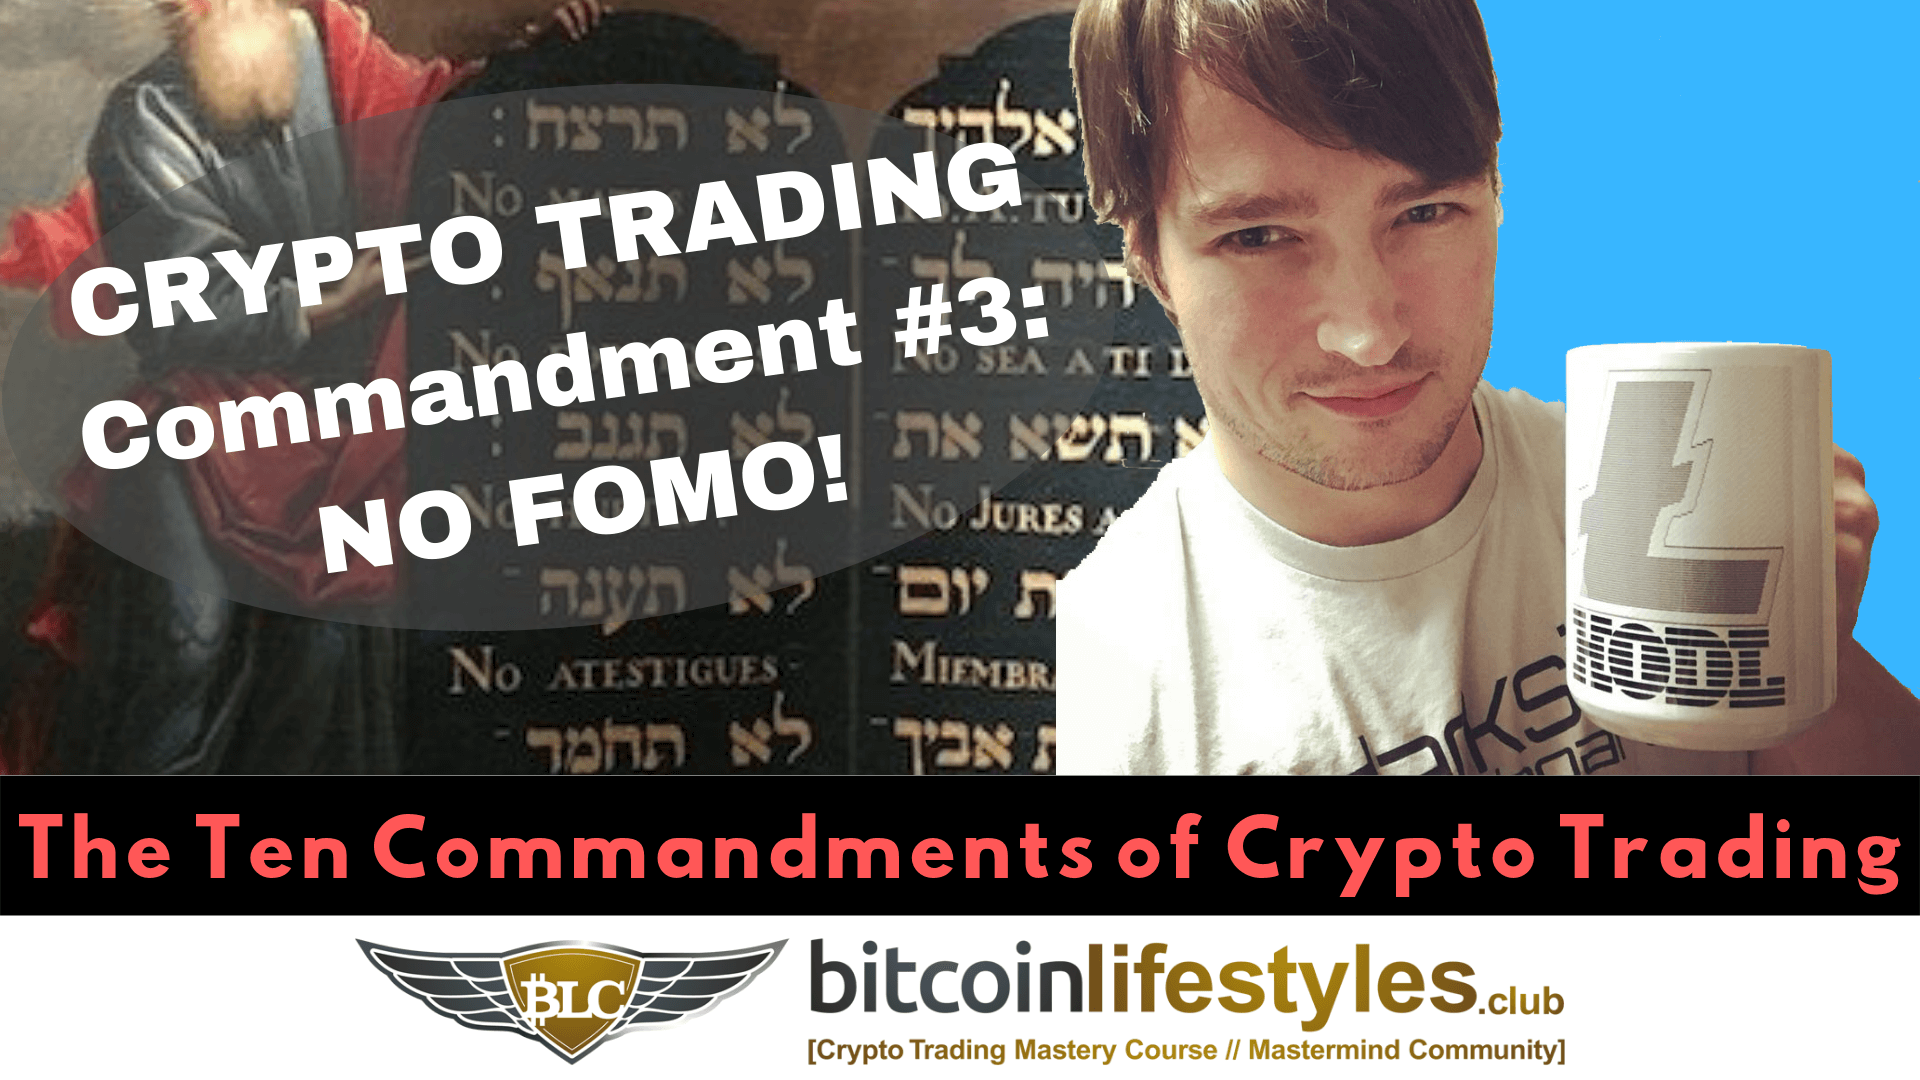 3rd Crypto Trading Commandment: Thou Shalt Not Commit Acts of FOMO